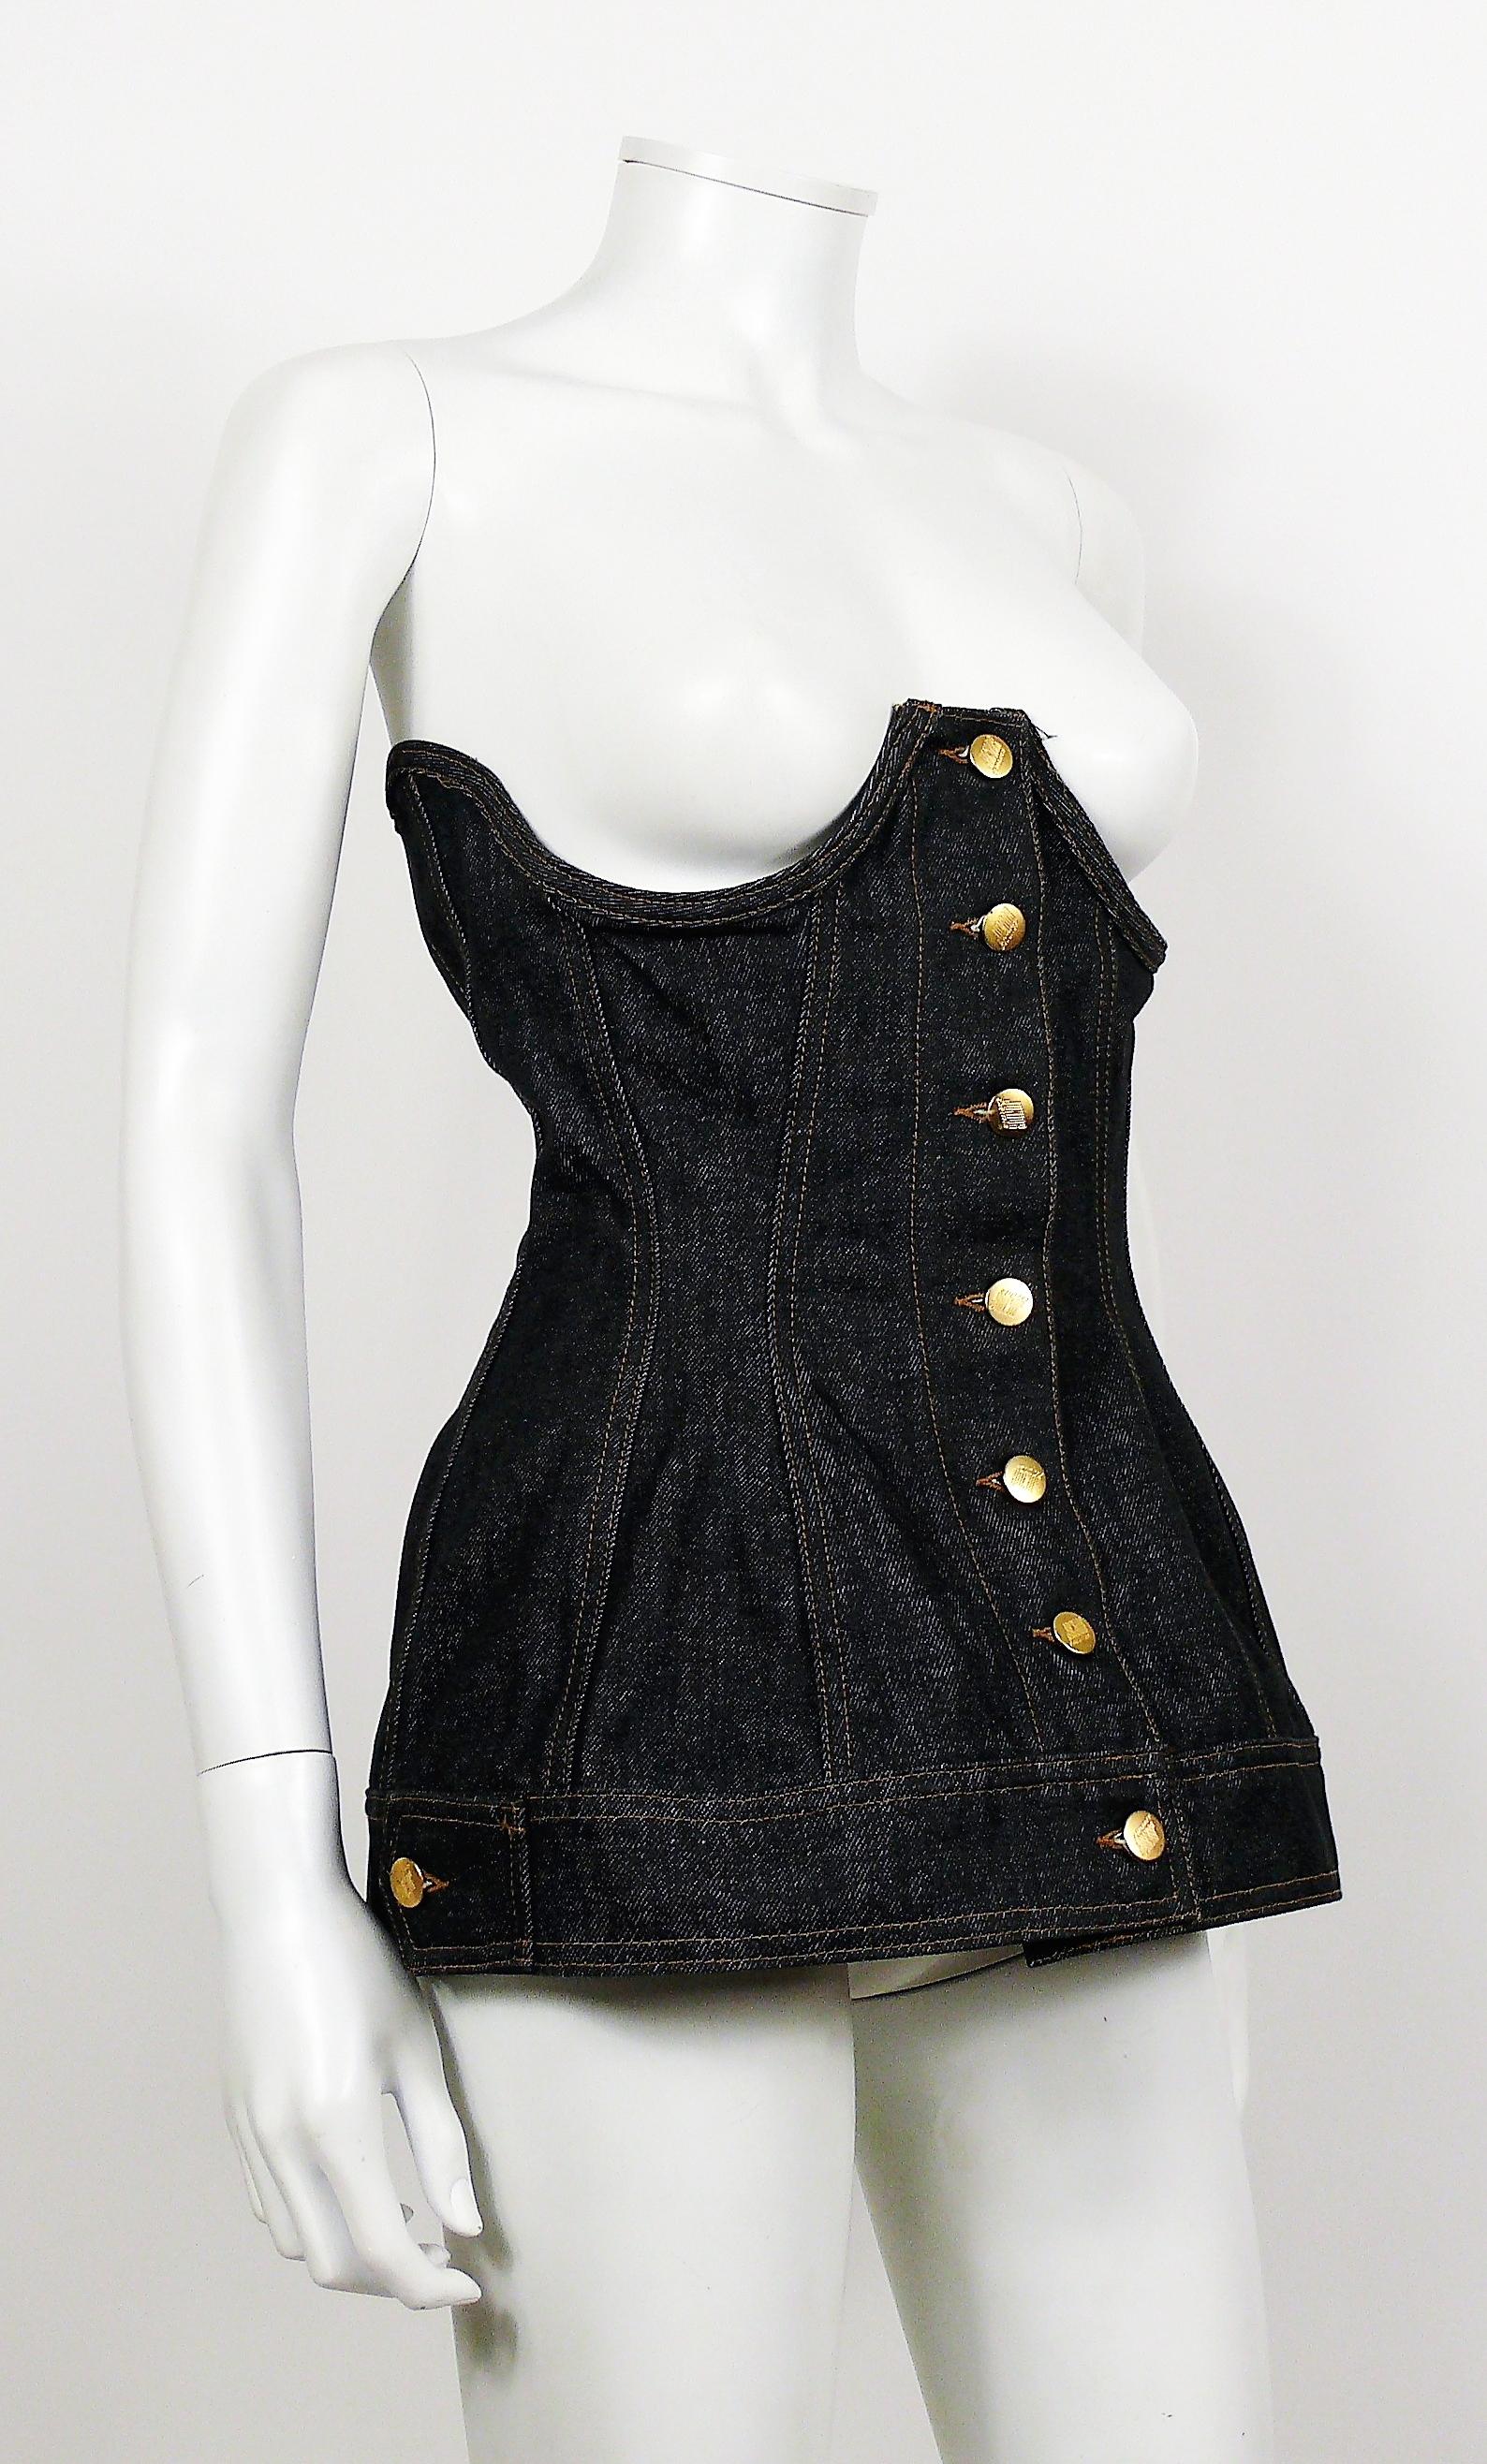 JEAN PAUL GAULTIER vintage black denim boned underbust corset.

Front buttoning.
Corset lace-up back fastening.
Boned underbust.

Label reads JUNIOR GAULTIER Made in Italy.

Composition label reads : 100 % Cotton.

Size label reads : 46.
Please